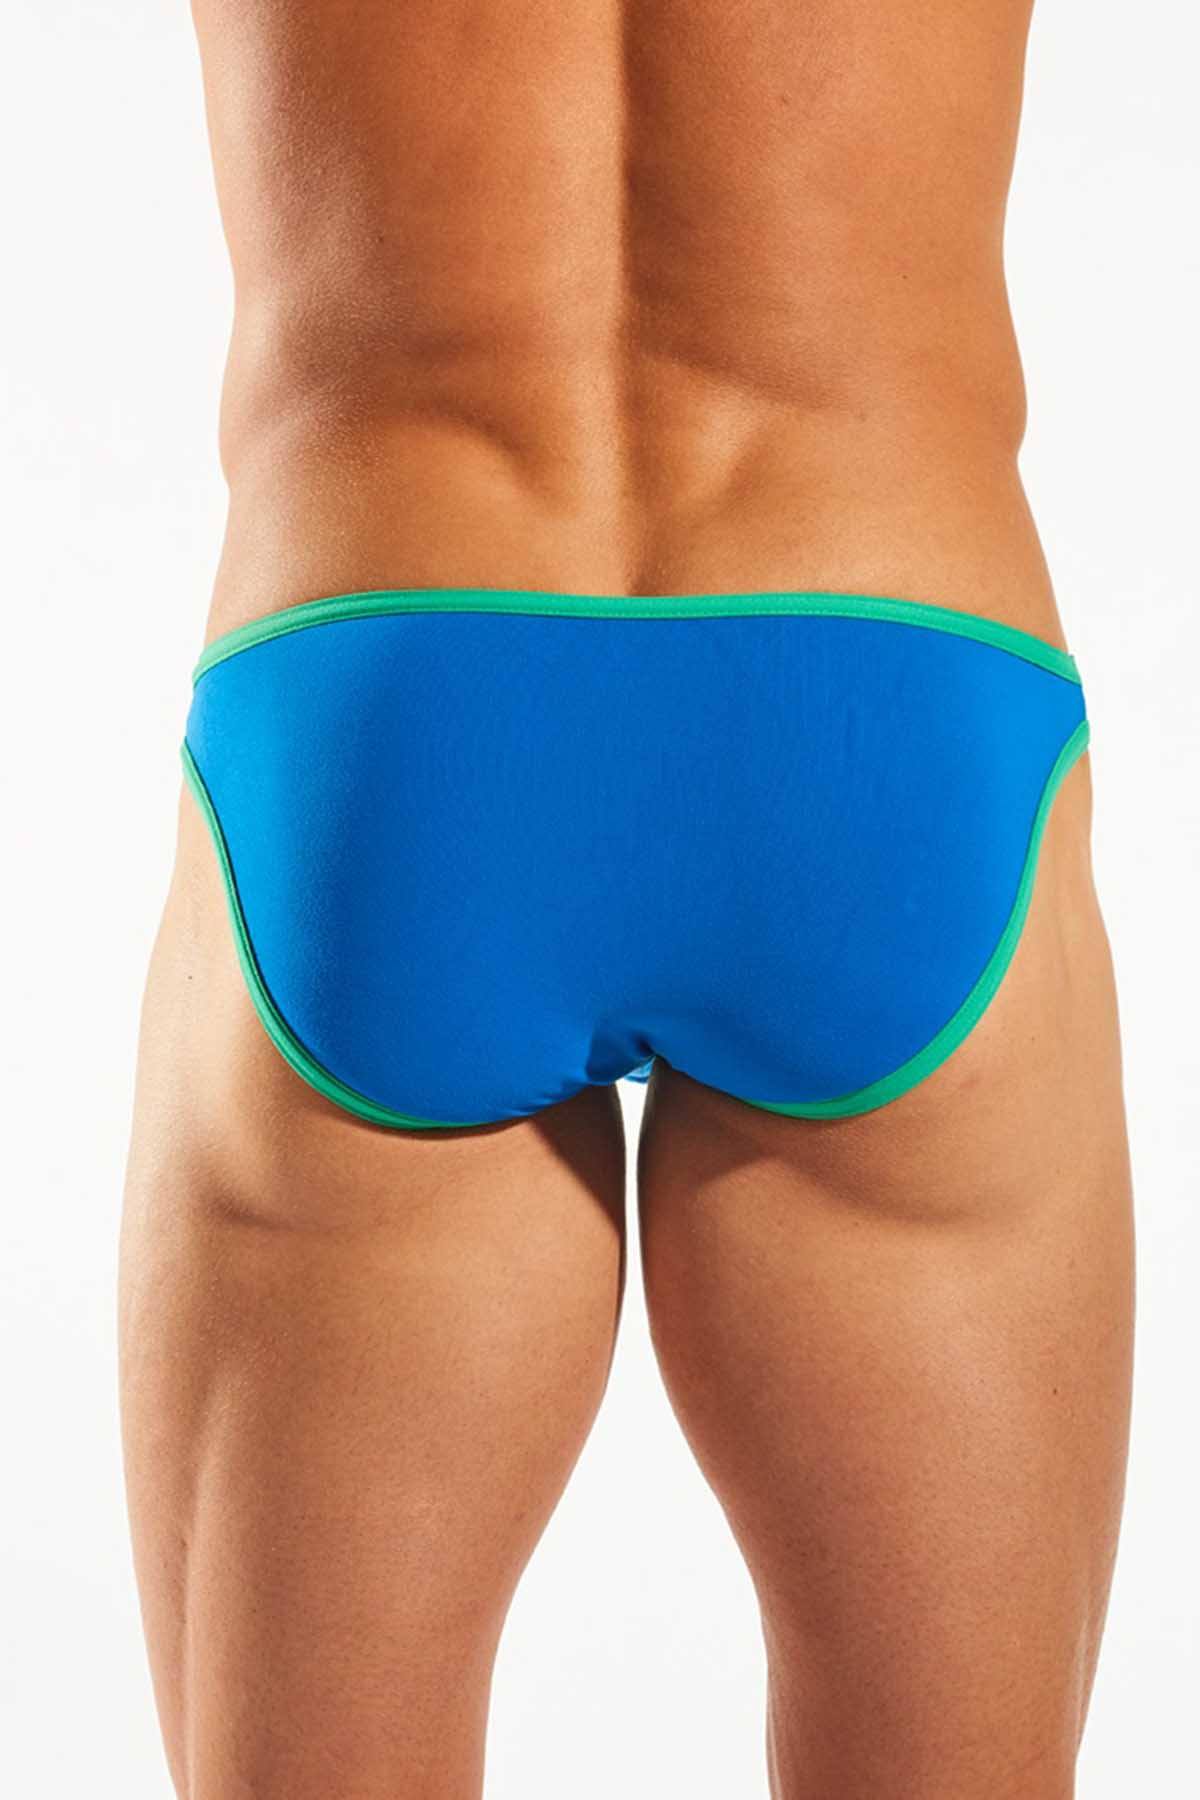 Cocksox Skydiver Brief with Bind